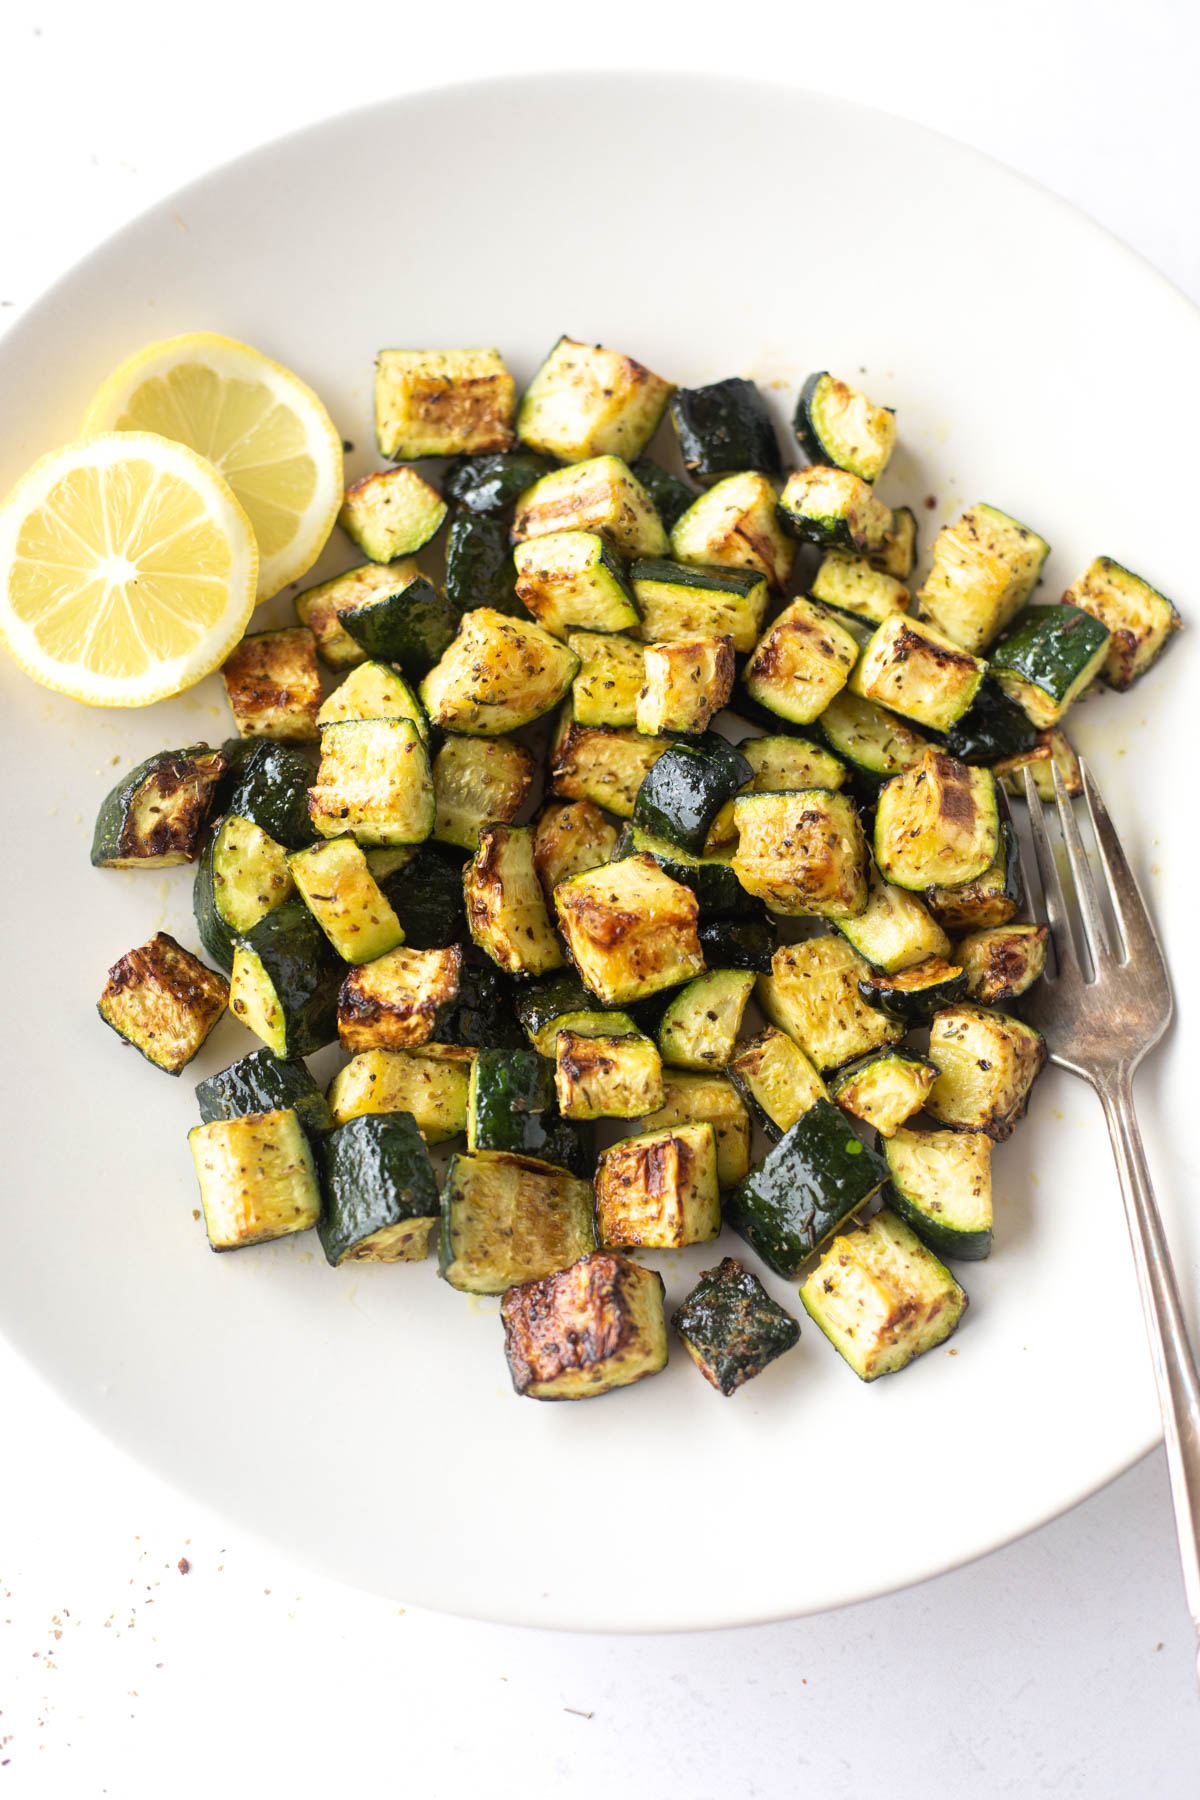 https://pipingpotcurry.com/wp-content/uploads/2023/02/Air-Fryer-Zucchini-Piping-Pot-Curry.jpg